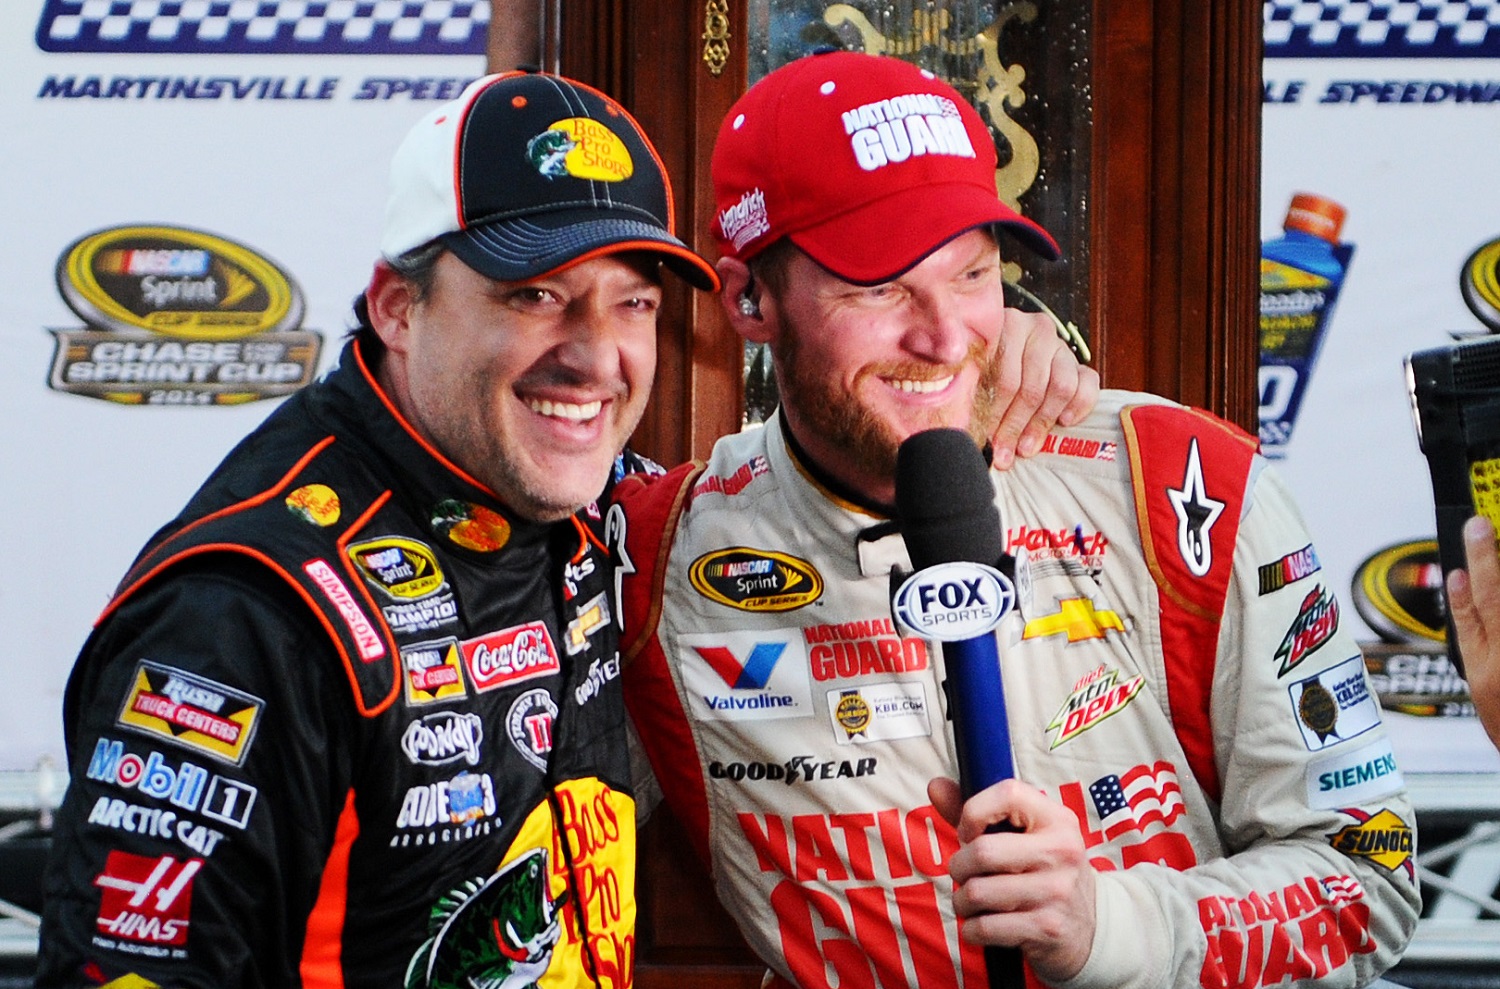 Dale Earnhardt Jr. is embraced by Tony Stewart after Earnhardt's victory in the NASCAR Sprint Cup Series Goody's Headache Relief Shot 500 at Martinsville Speedway on Oct. 26, 2014.